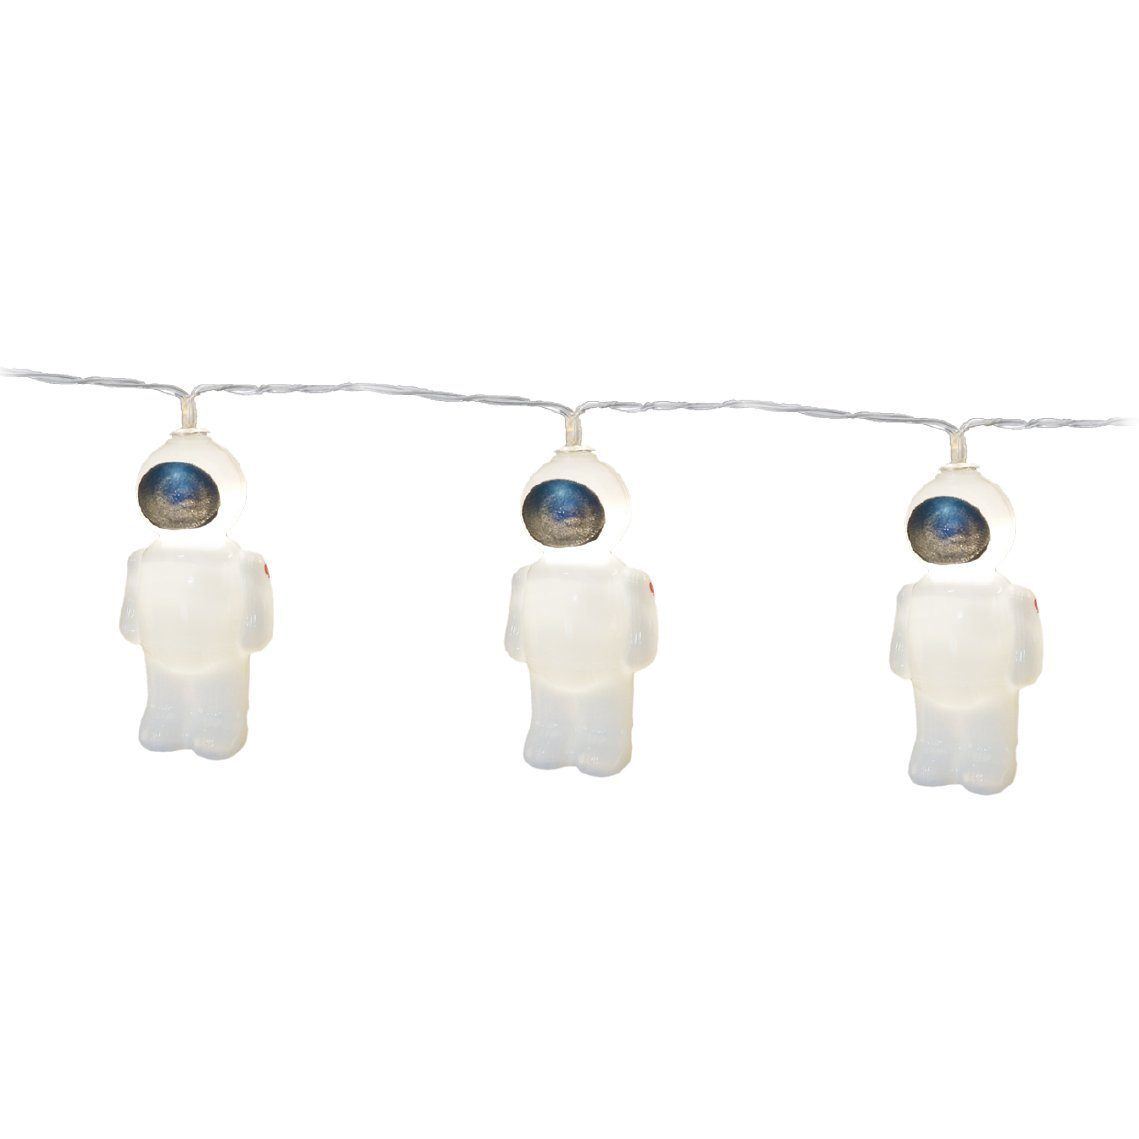 Pilot Toys Astronaut Battery Powered Color Changing String Lights